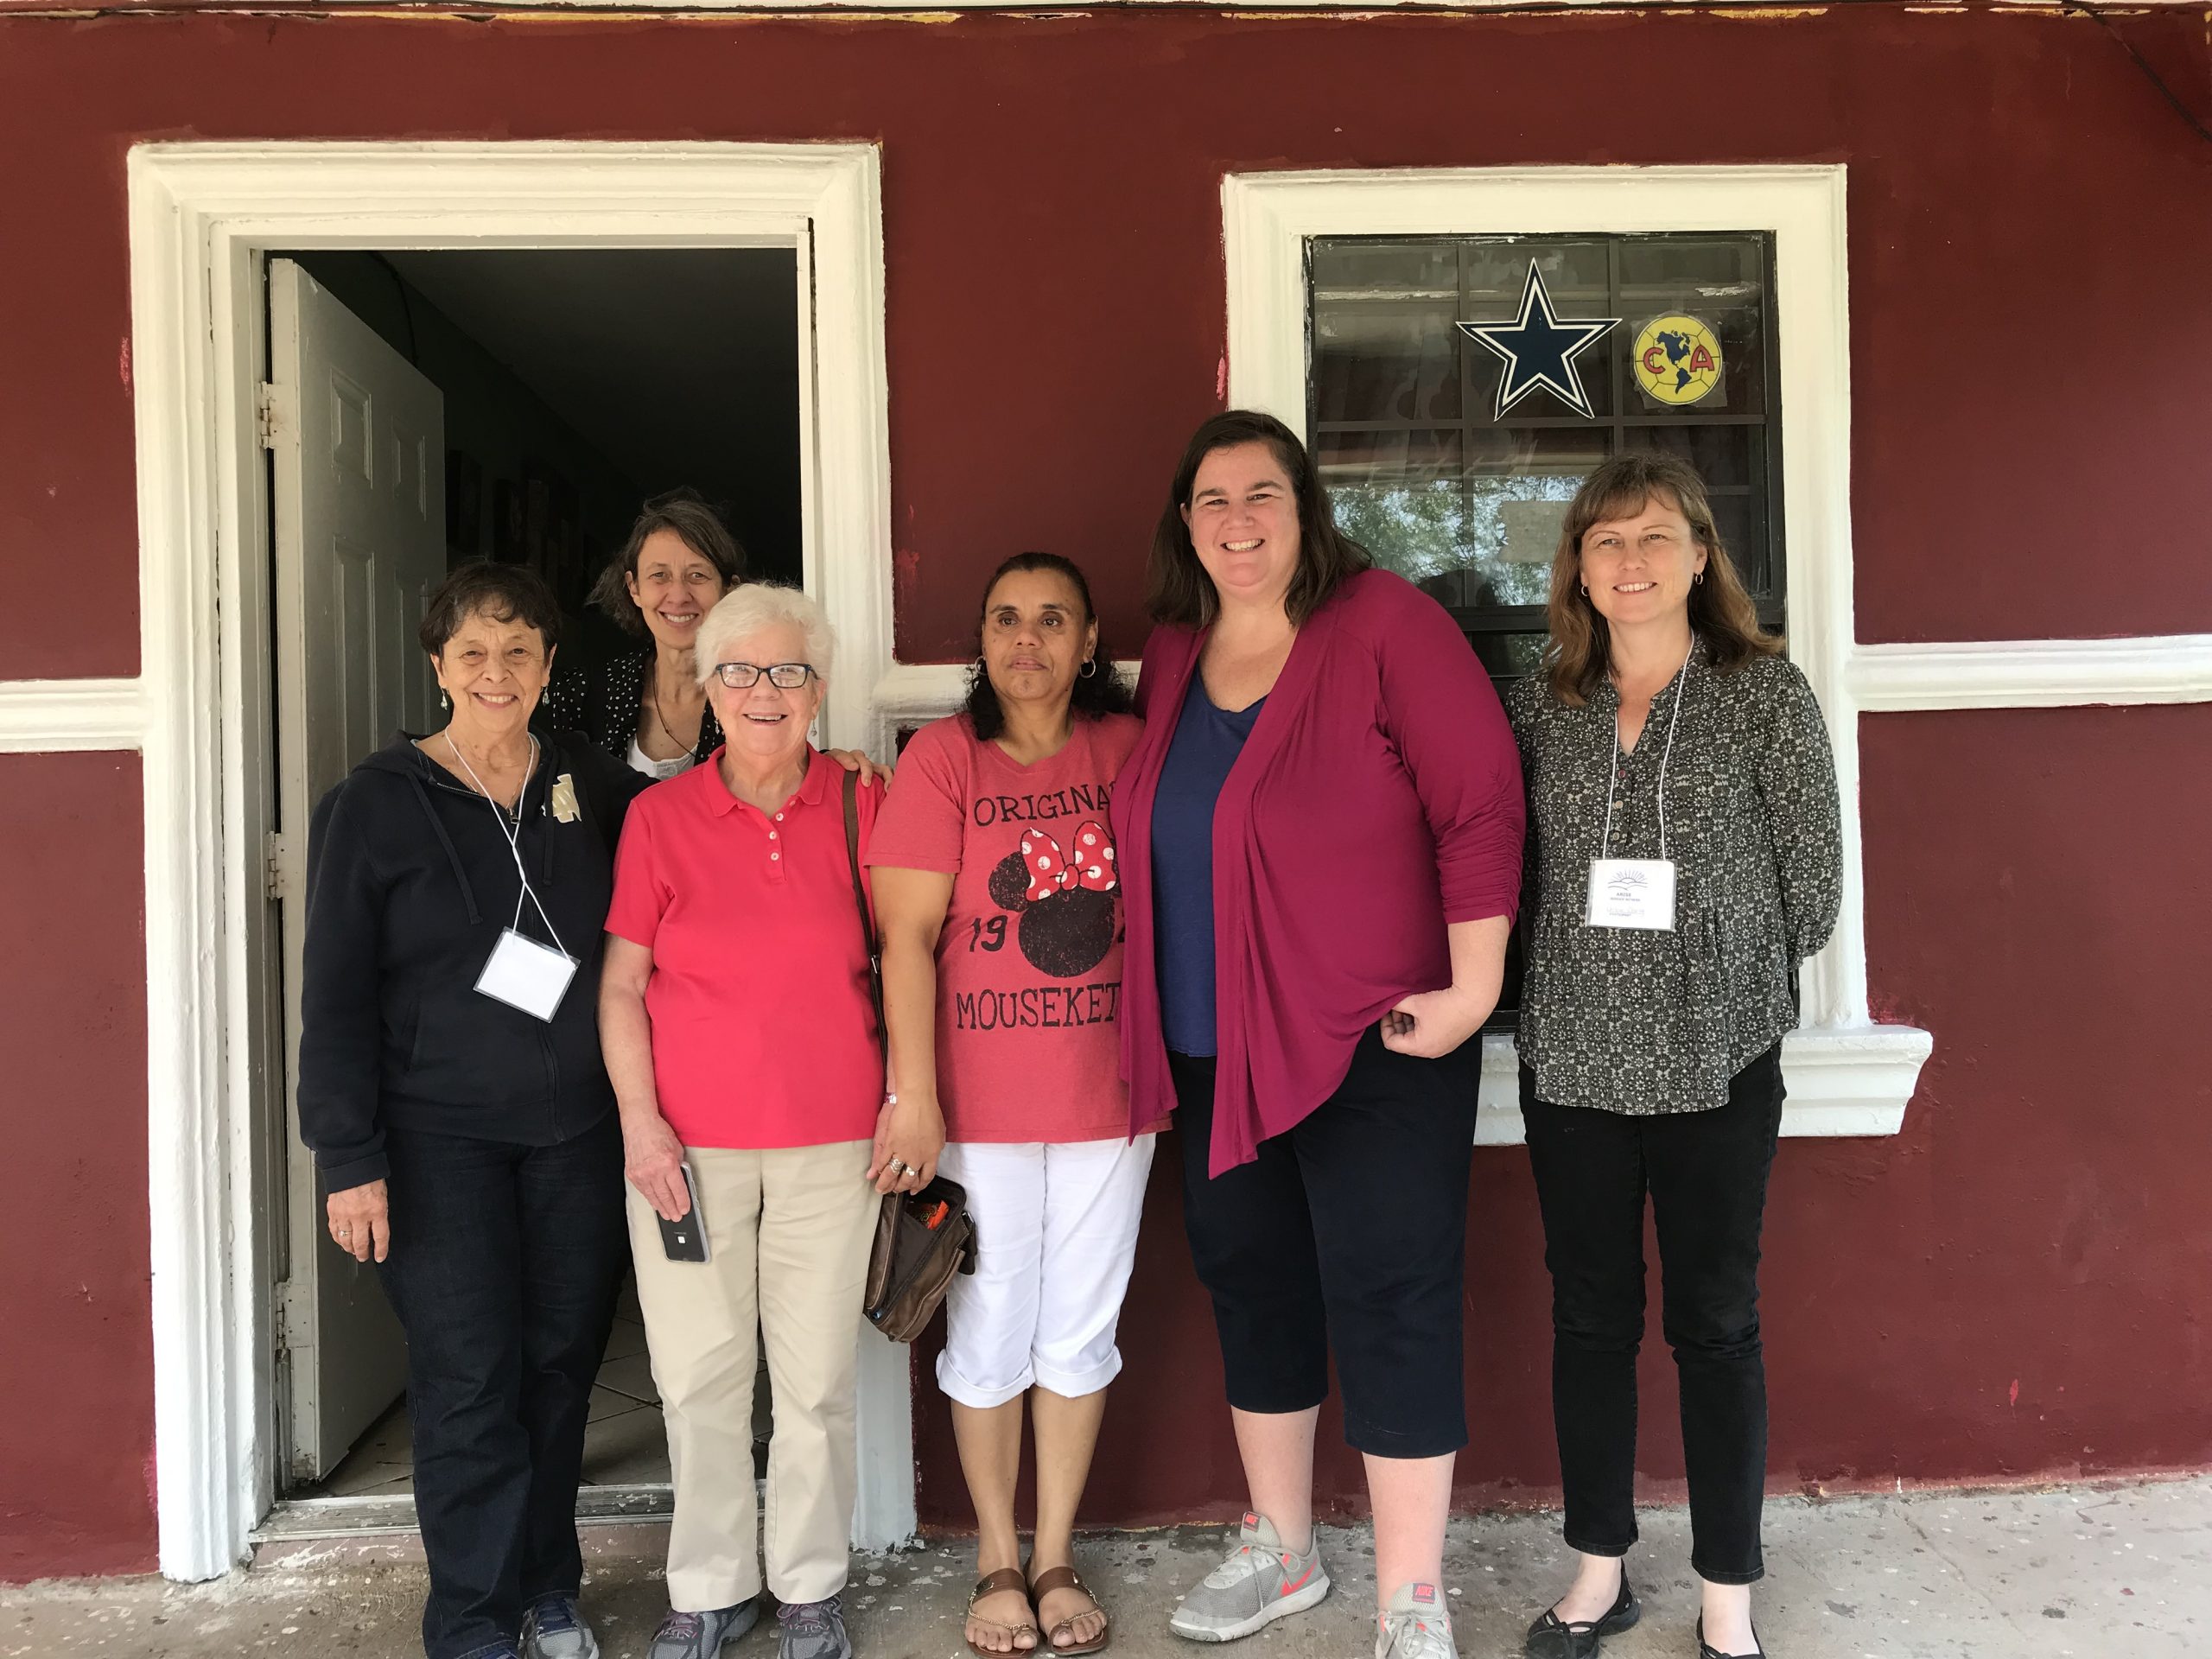 Sister Marilyn Morgan, Jean Stokan, Sister Joanne Whitaker, Manuela, Maggie Conley and Denise, another volunteer, gather outside the door of Manuela’s home in Alamo, Texas.